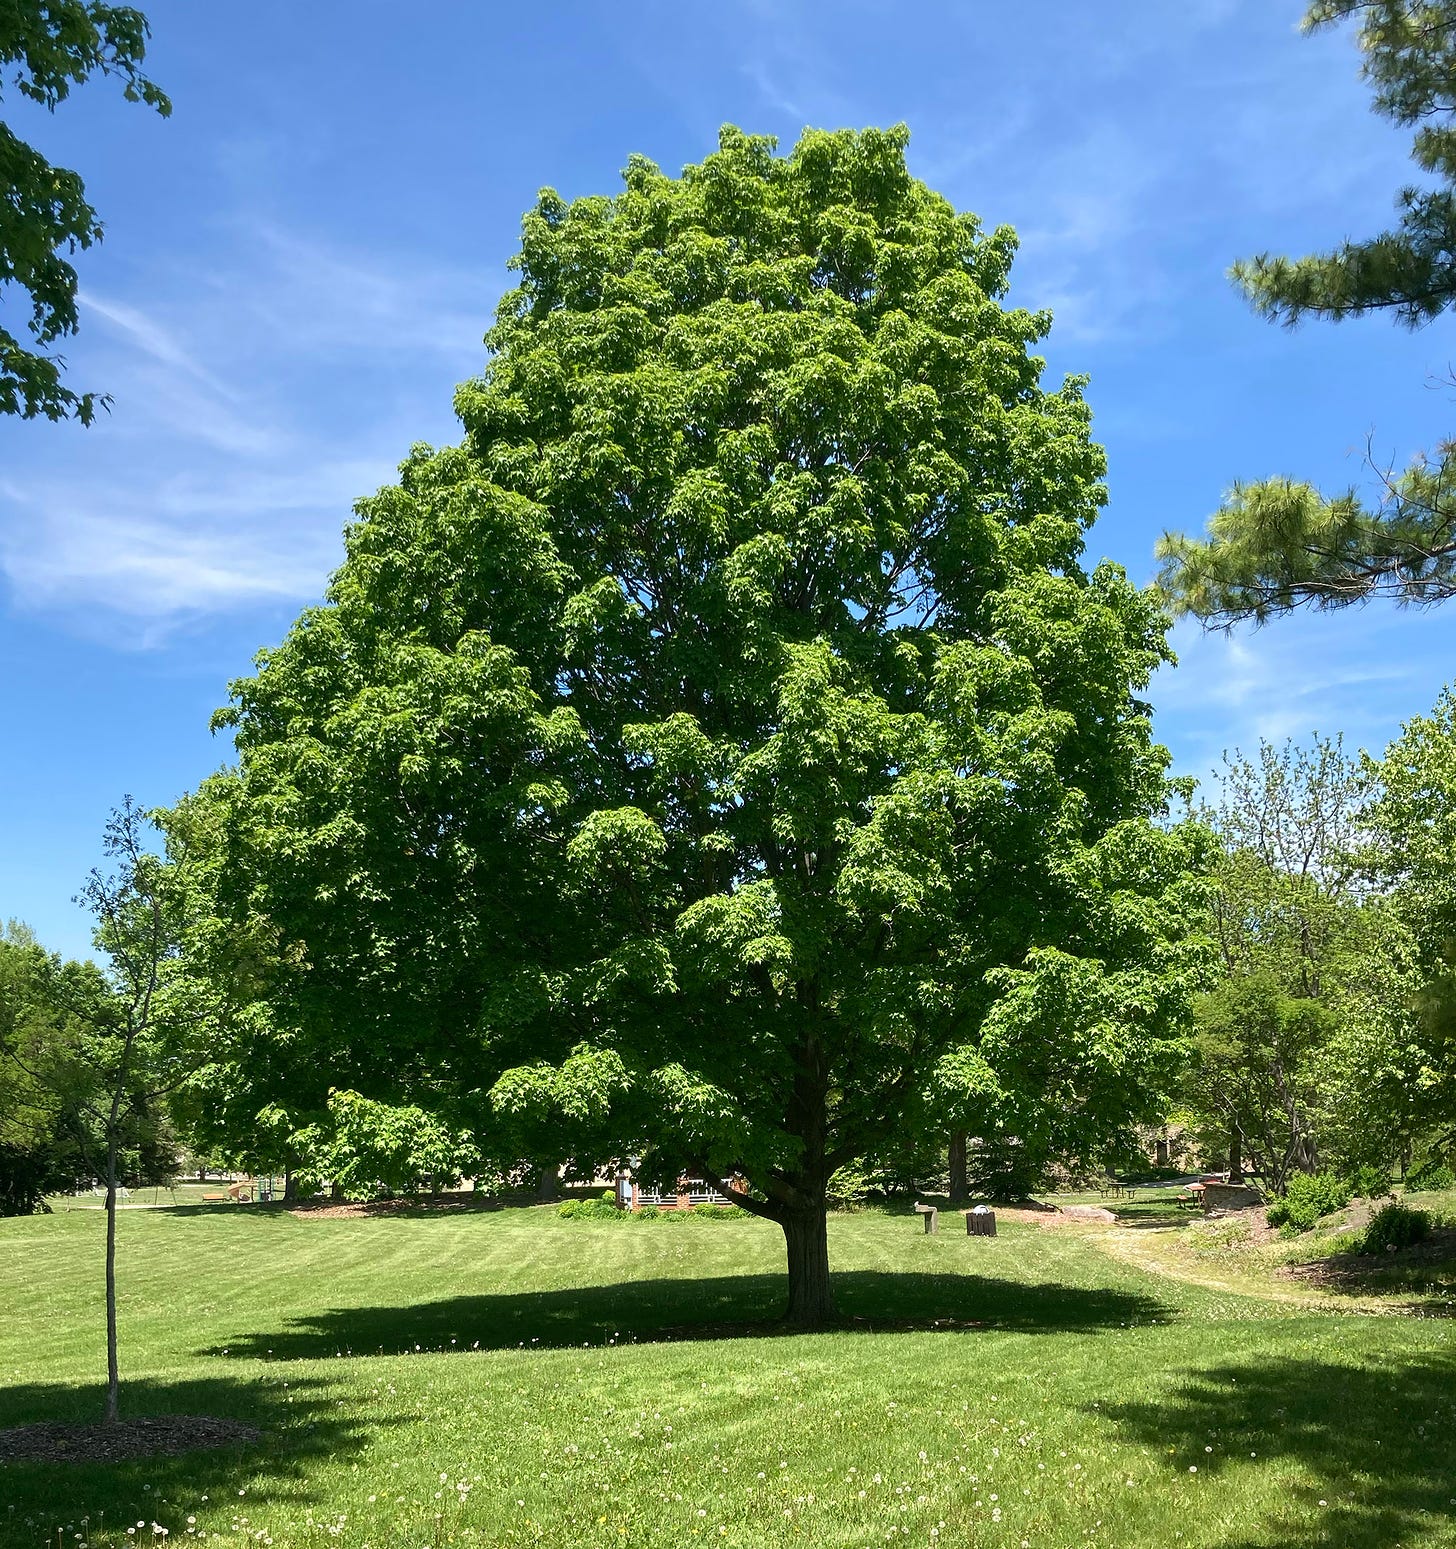 A wide-spreading maple tree in a landscaped park